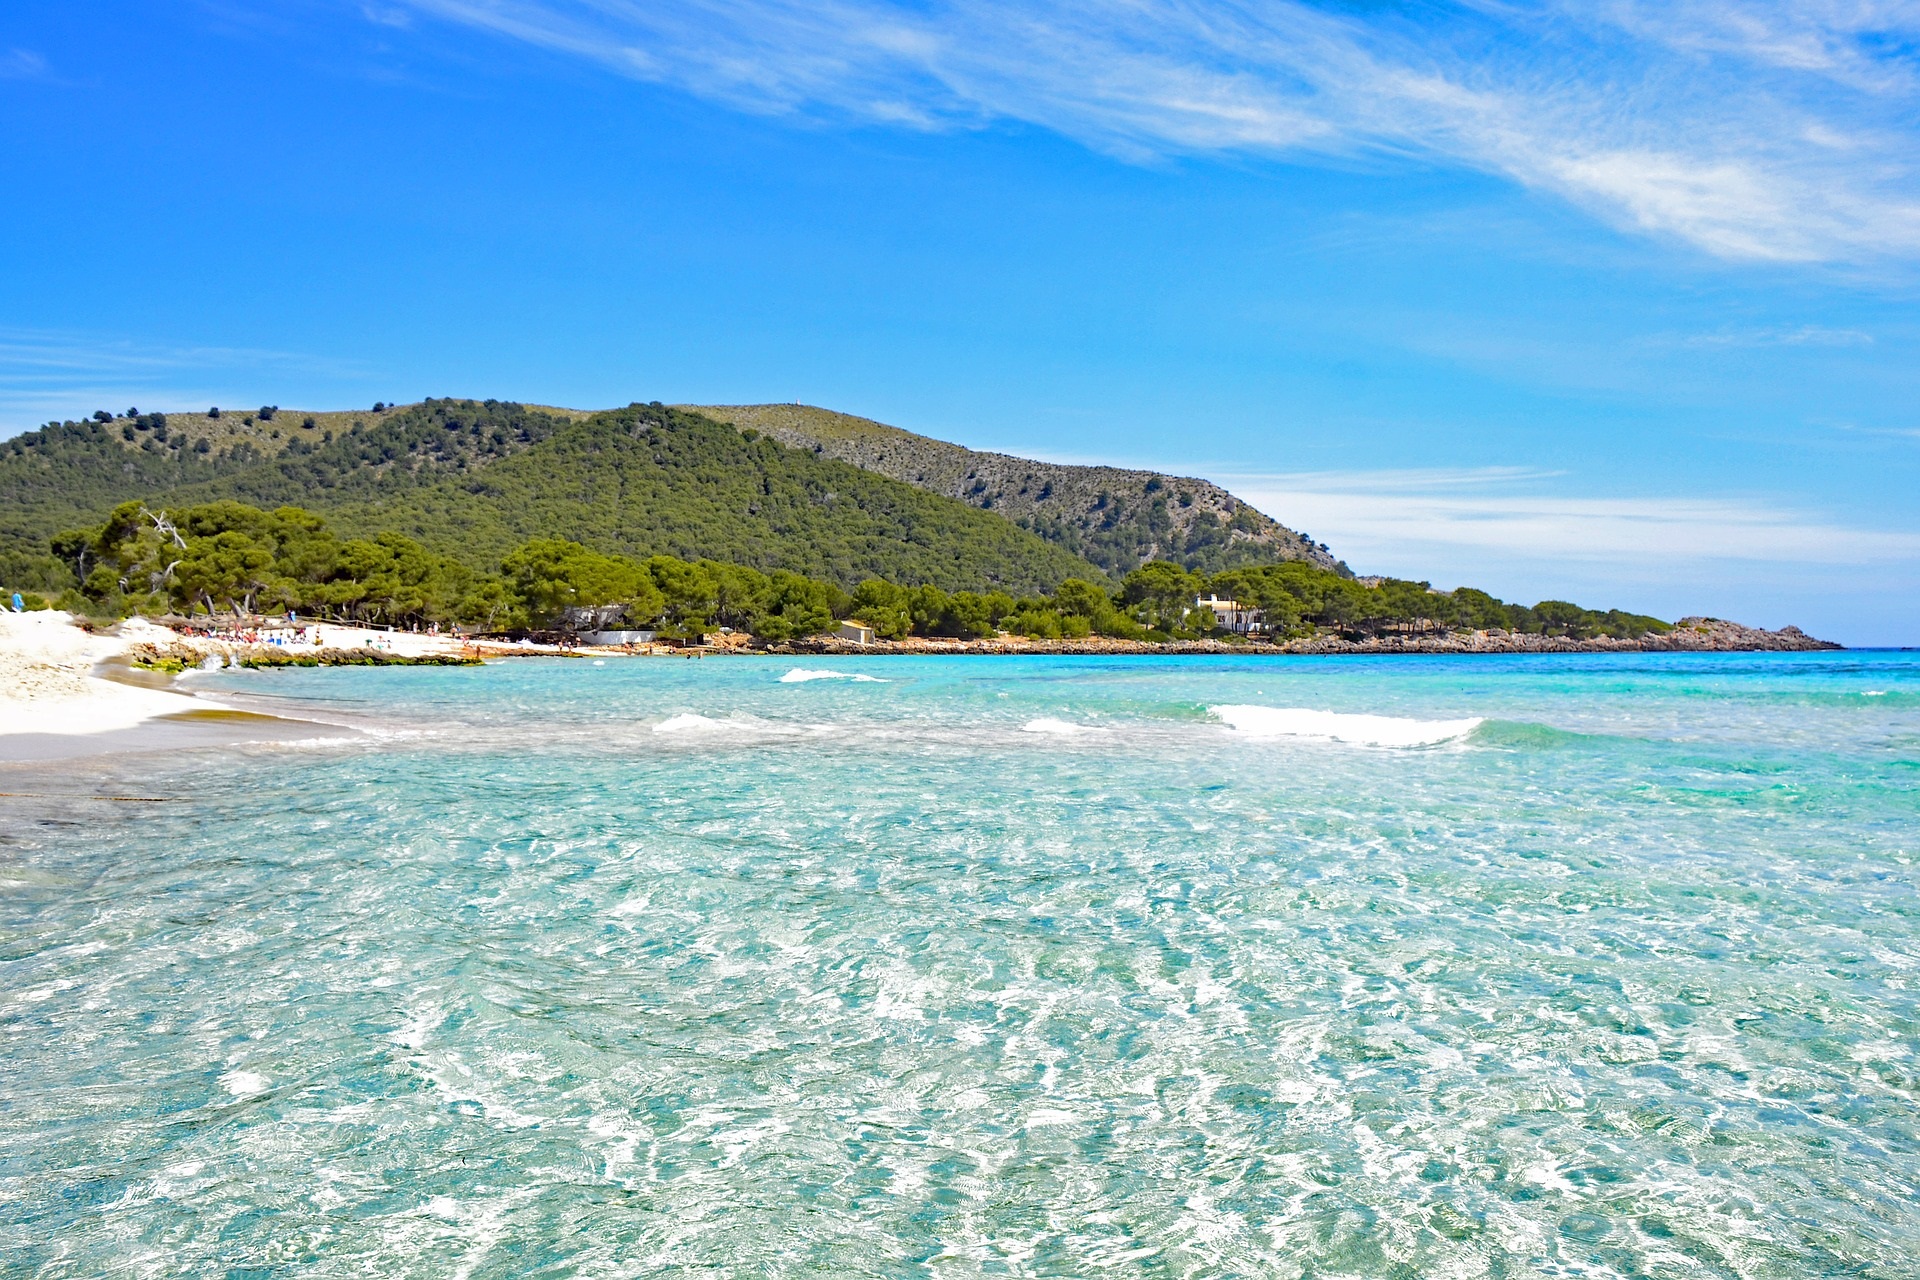 Summer Edition: Where will you find the top Beaches in Spain?